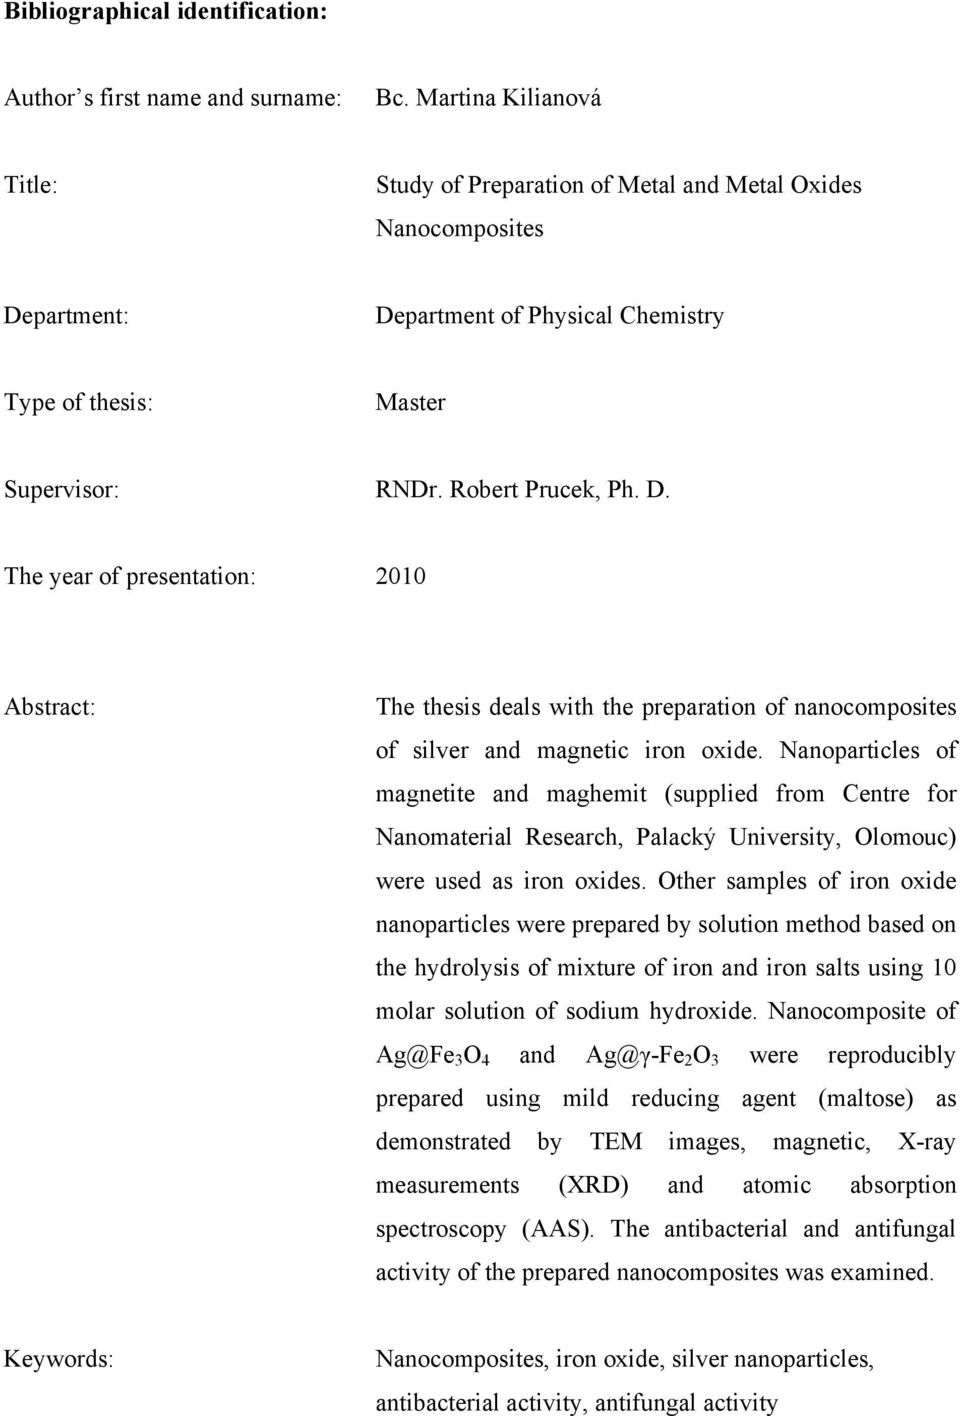 partment: Department of Physical Chemistry Type of thesis: Master Supervisor: RNDr. Robert Prucek, Ph. D. The year of presentation: 2010 Abstract: The thesis deals with the preparation of nanocomposites of silver and magnetic iron oxide.